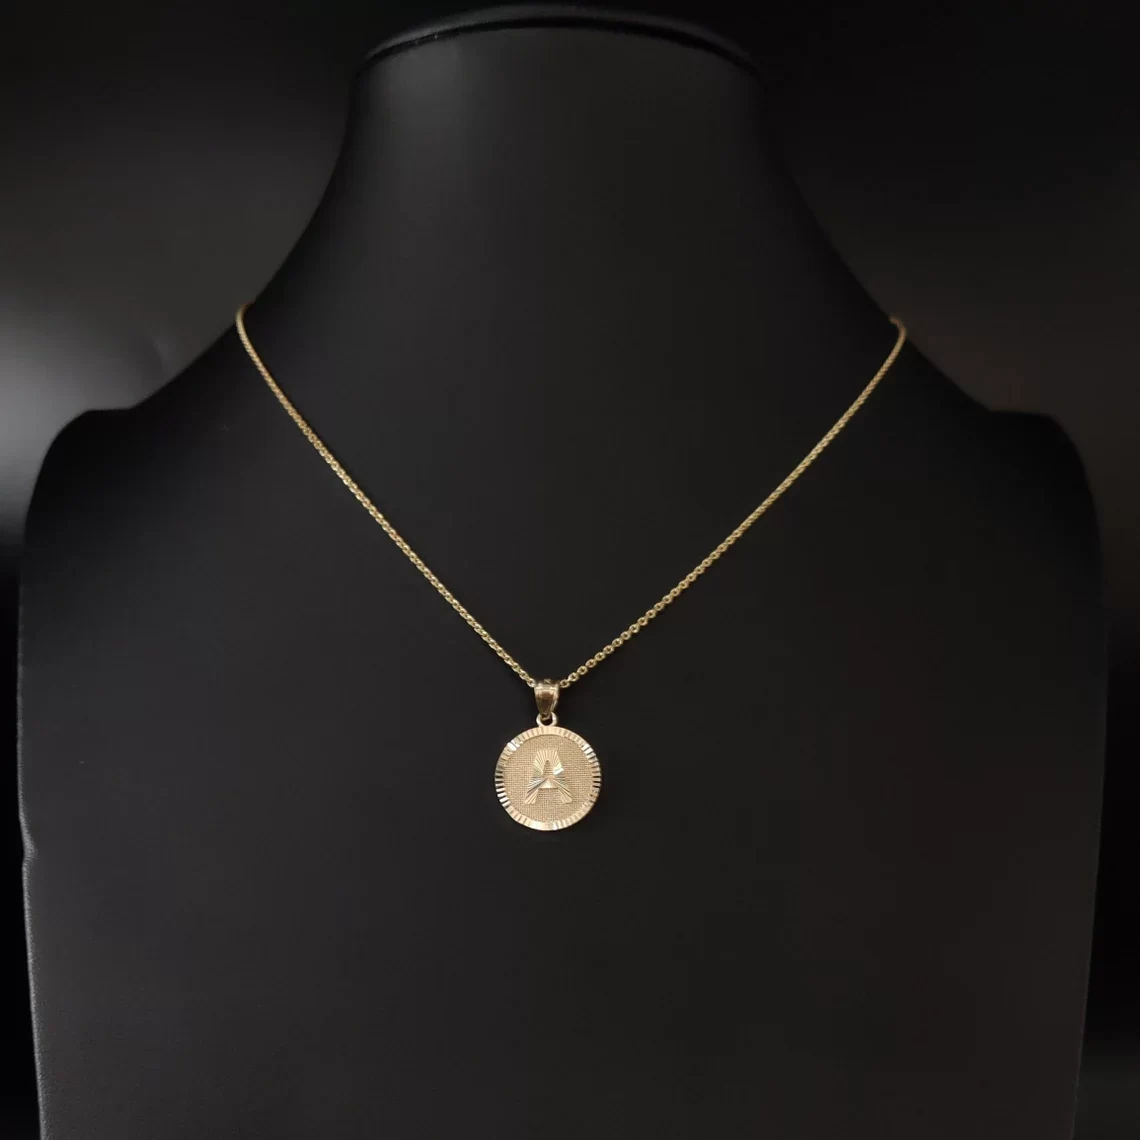 10k gold initial necklace on a neck maneqquin